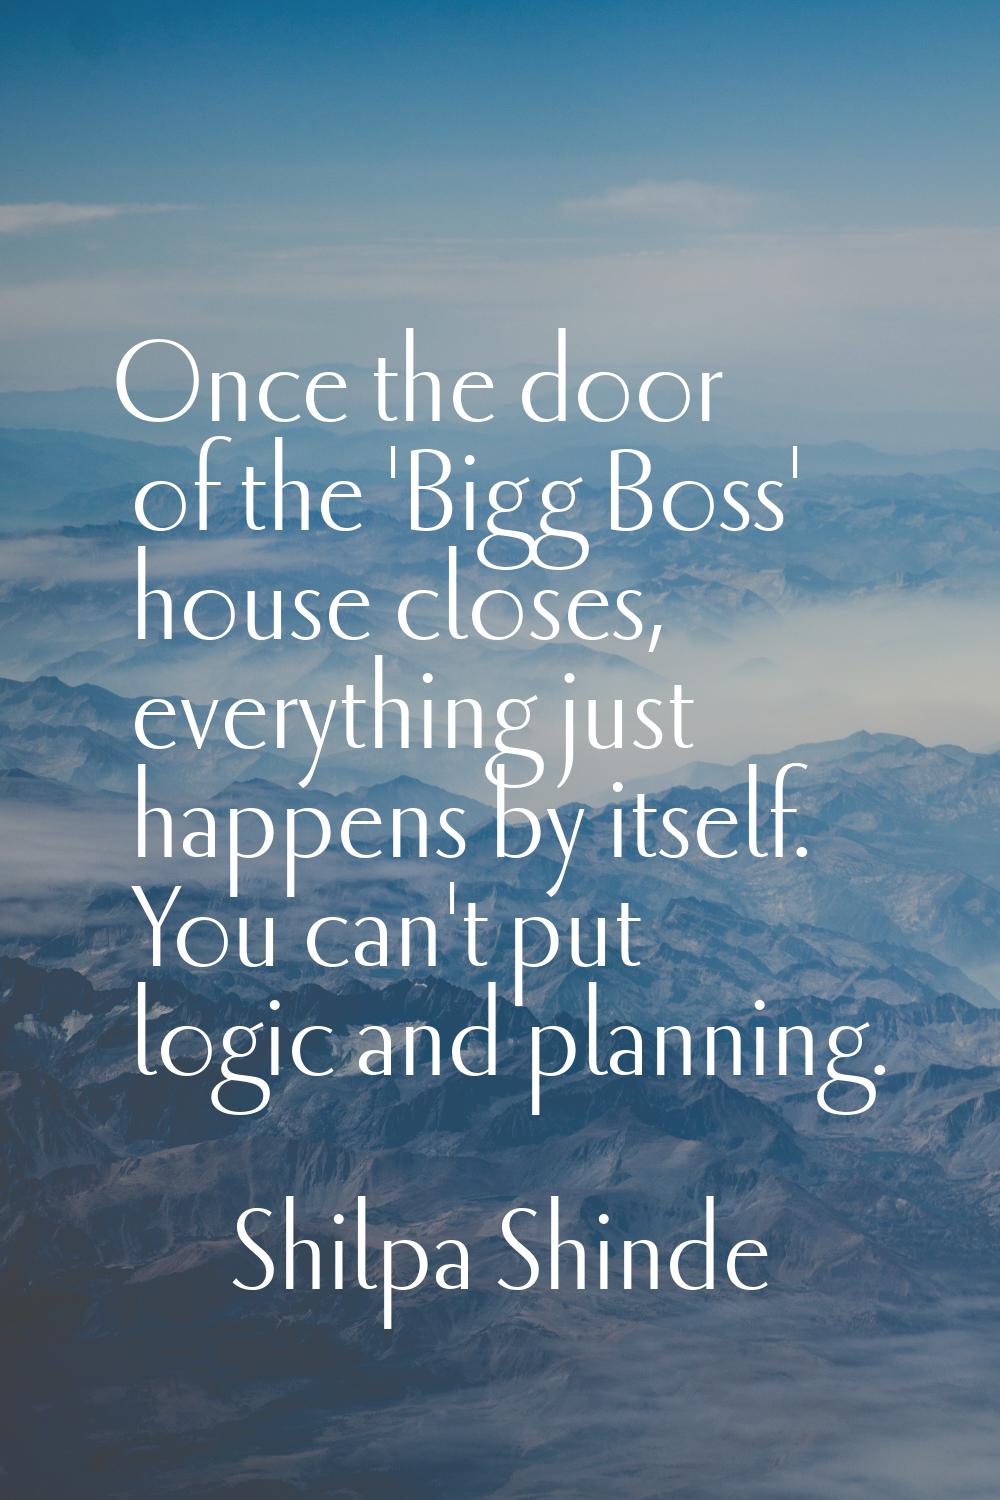 Once the door of the 'Bigg Boss' house closes, everything just happens by itself. You can't put log